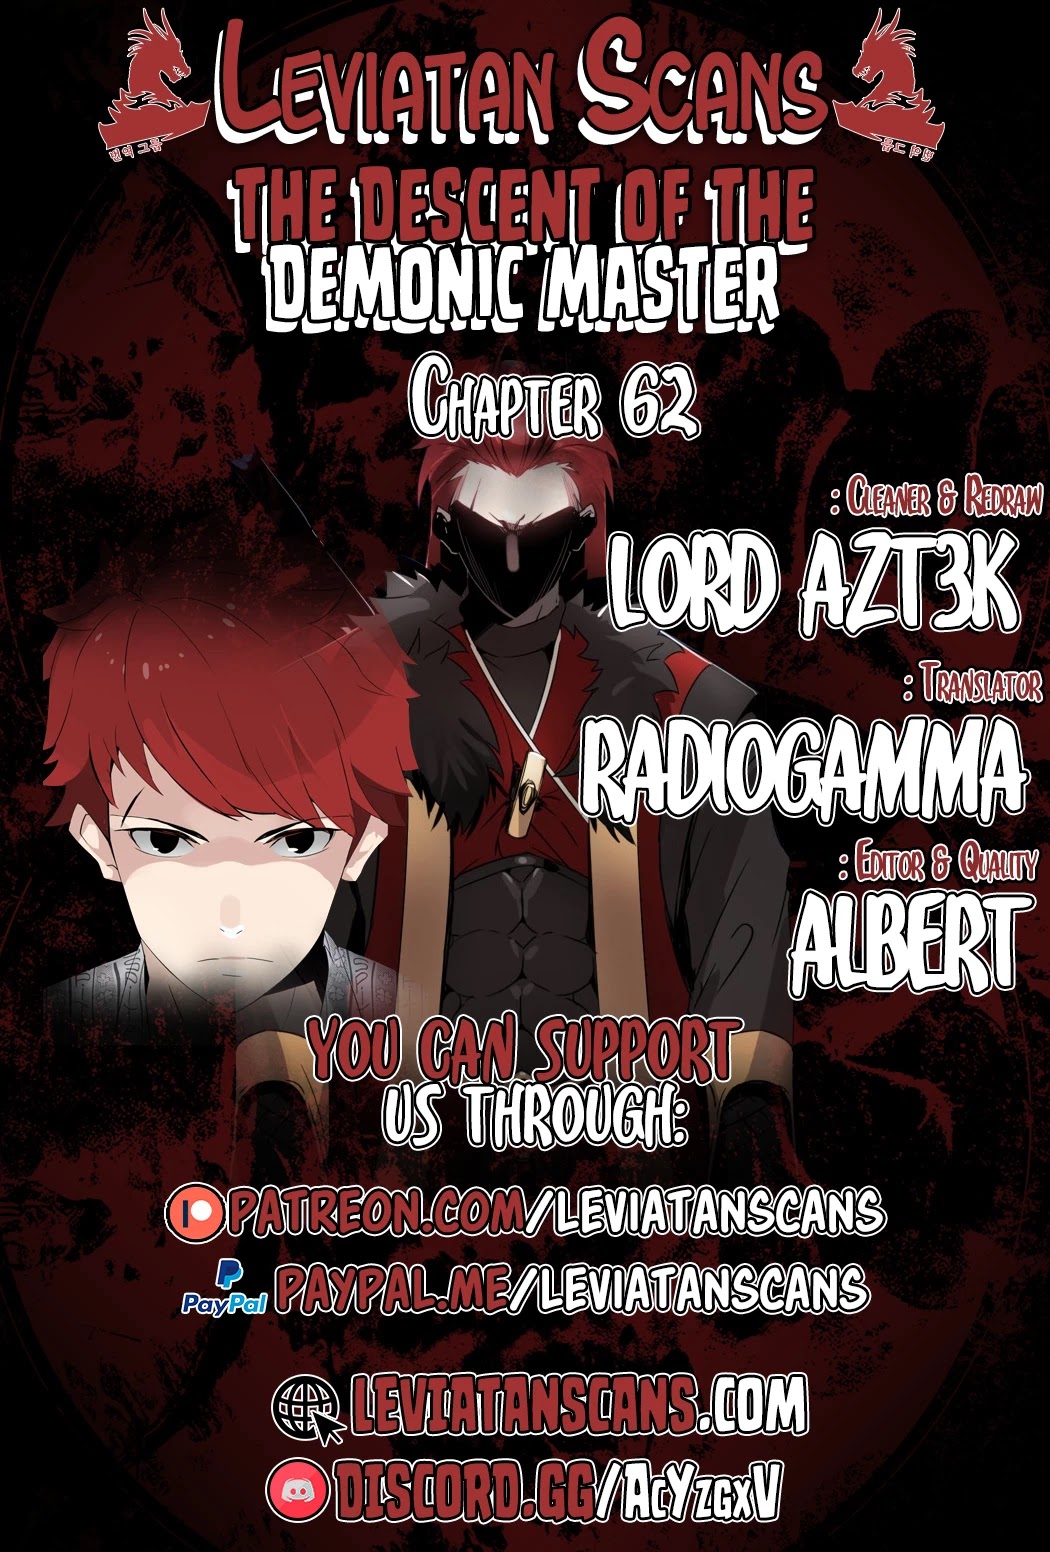 The Descent Of The Demonic Master Chapter 62